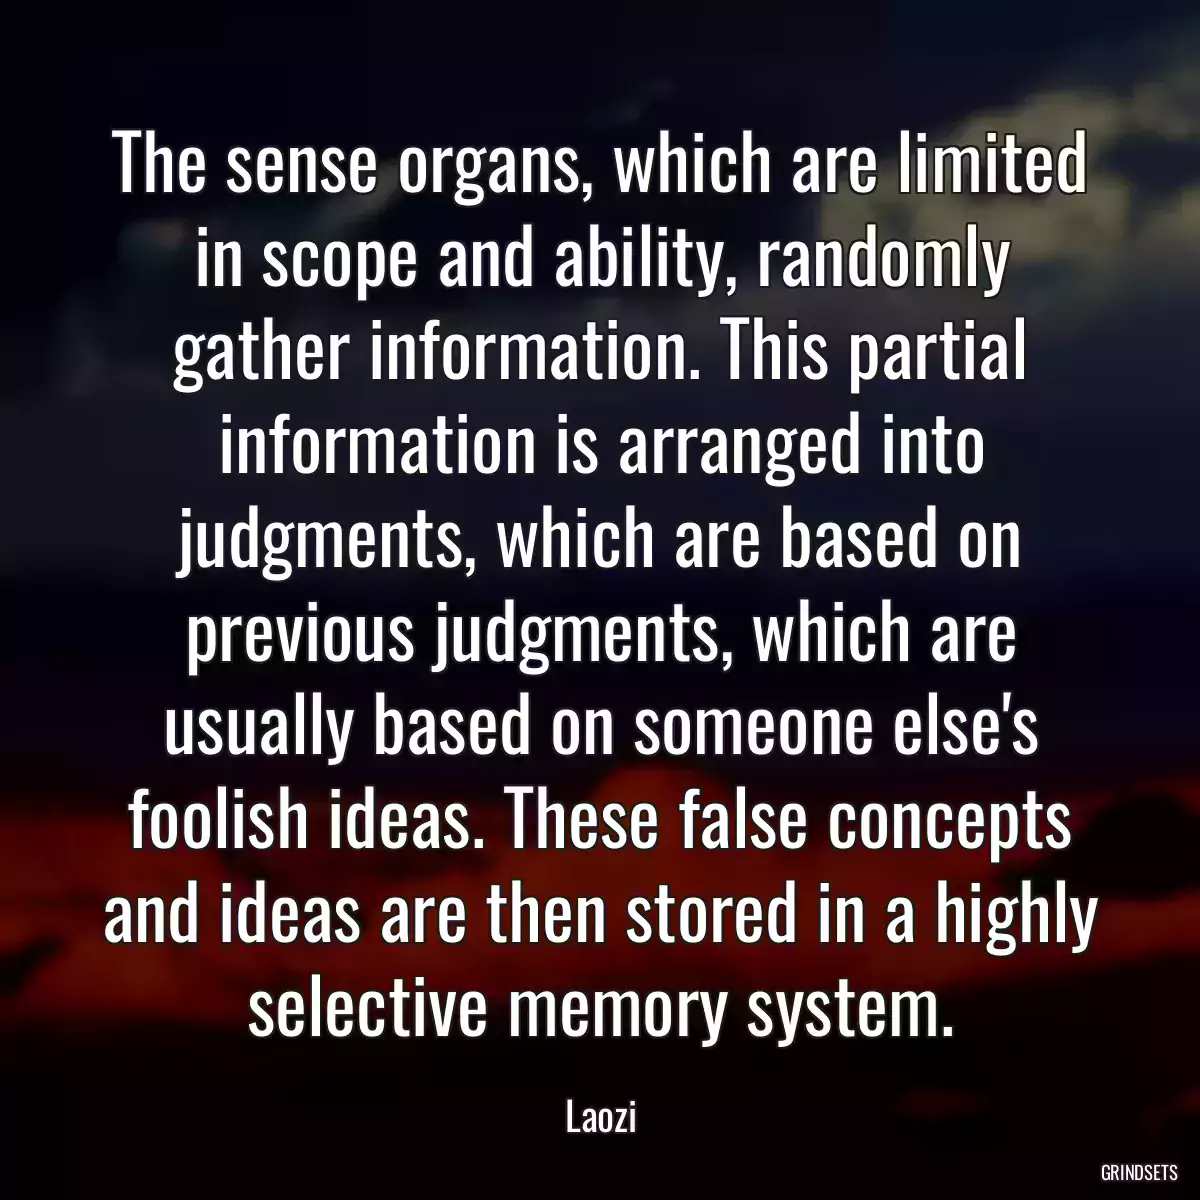 The sense organs, which are limited in scope and ability, randomly gather information. This partial information is arranged into judgments, which are based on previous judgments, which are usually based on someone else\'s foolish ideas. These false concepts and ideas are then stored in a highly selective memory system.